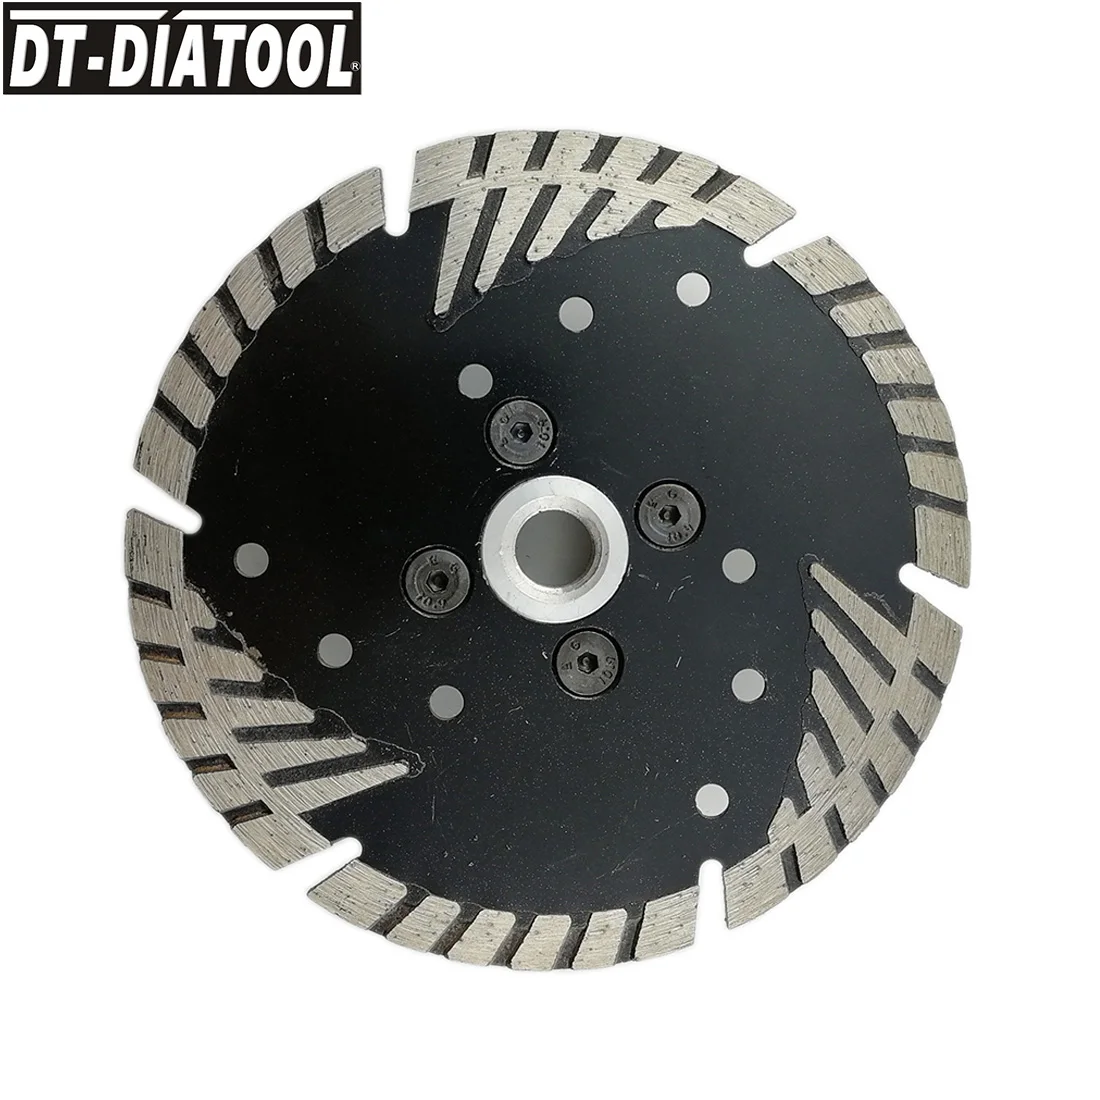 

DT-DIATOOL 1pc 5inch M14 thread Diamond Cutting Disc with Slant Protection Teeth Saw Blades for Stone Granite Marble Dia 125mm